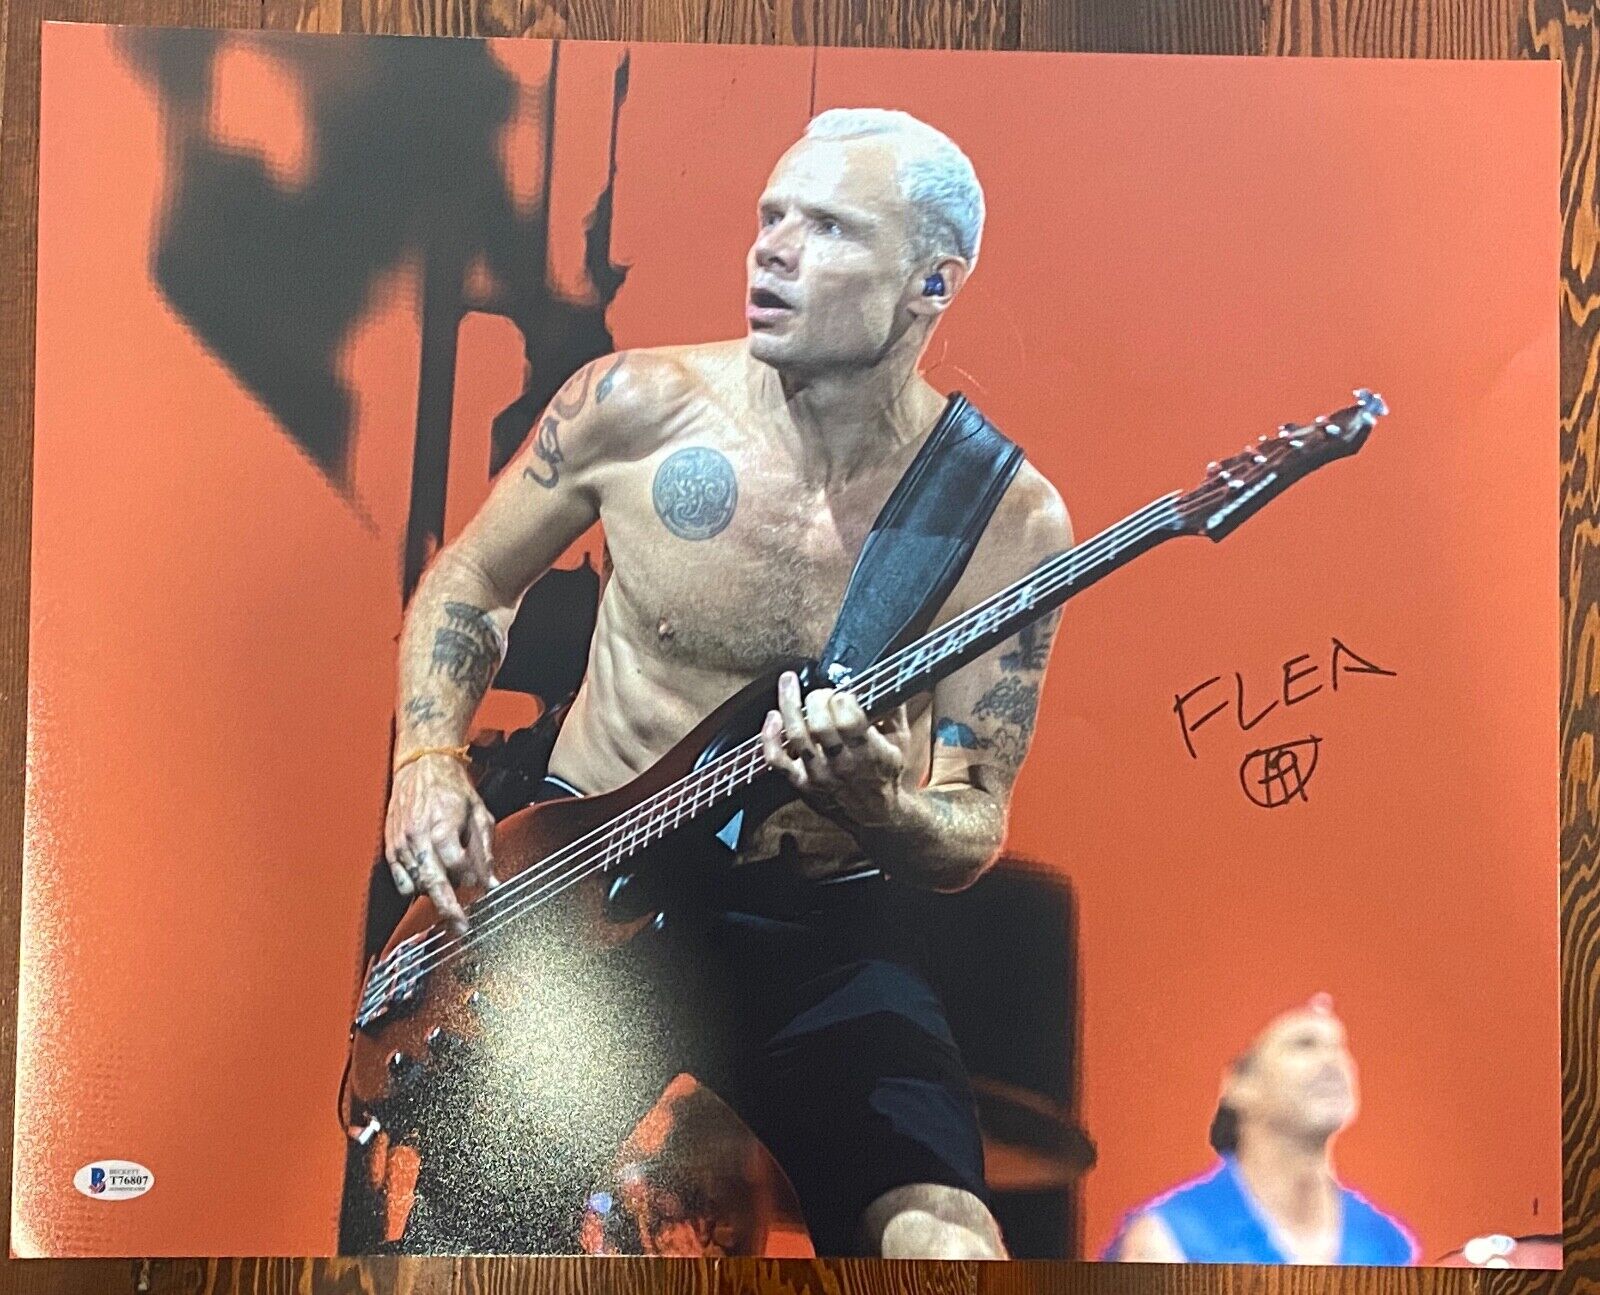 Flea Signed Autographed 16x20 Photo Poster painting Poster Red Hot Chili Peppers Beckett BAS COA